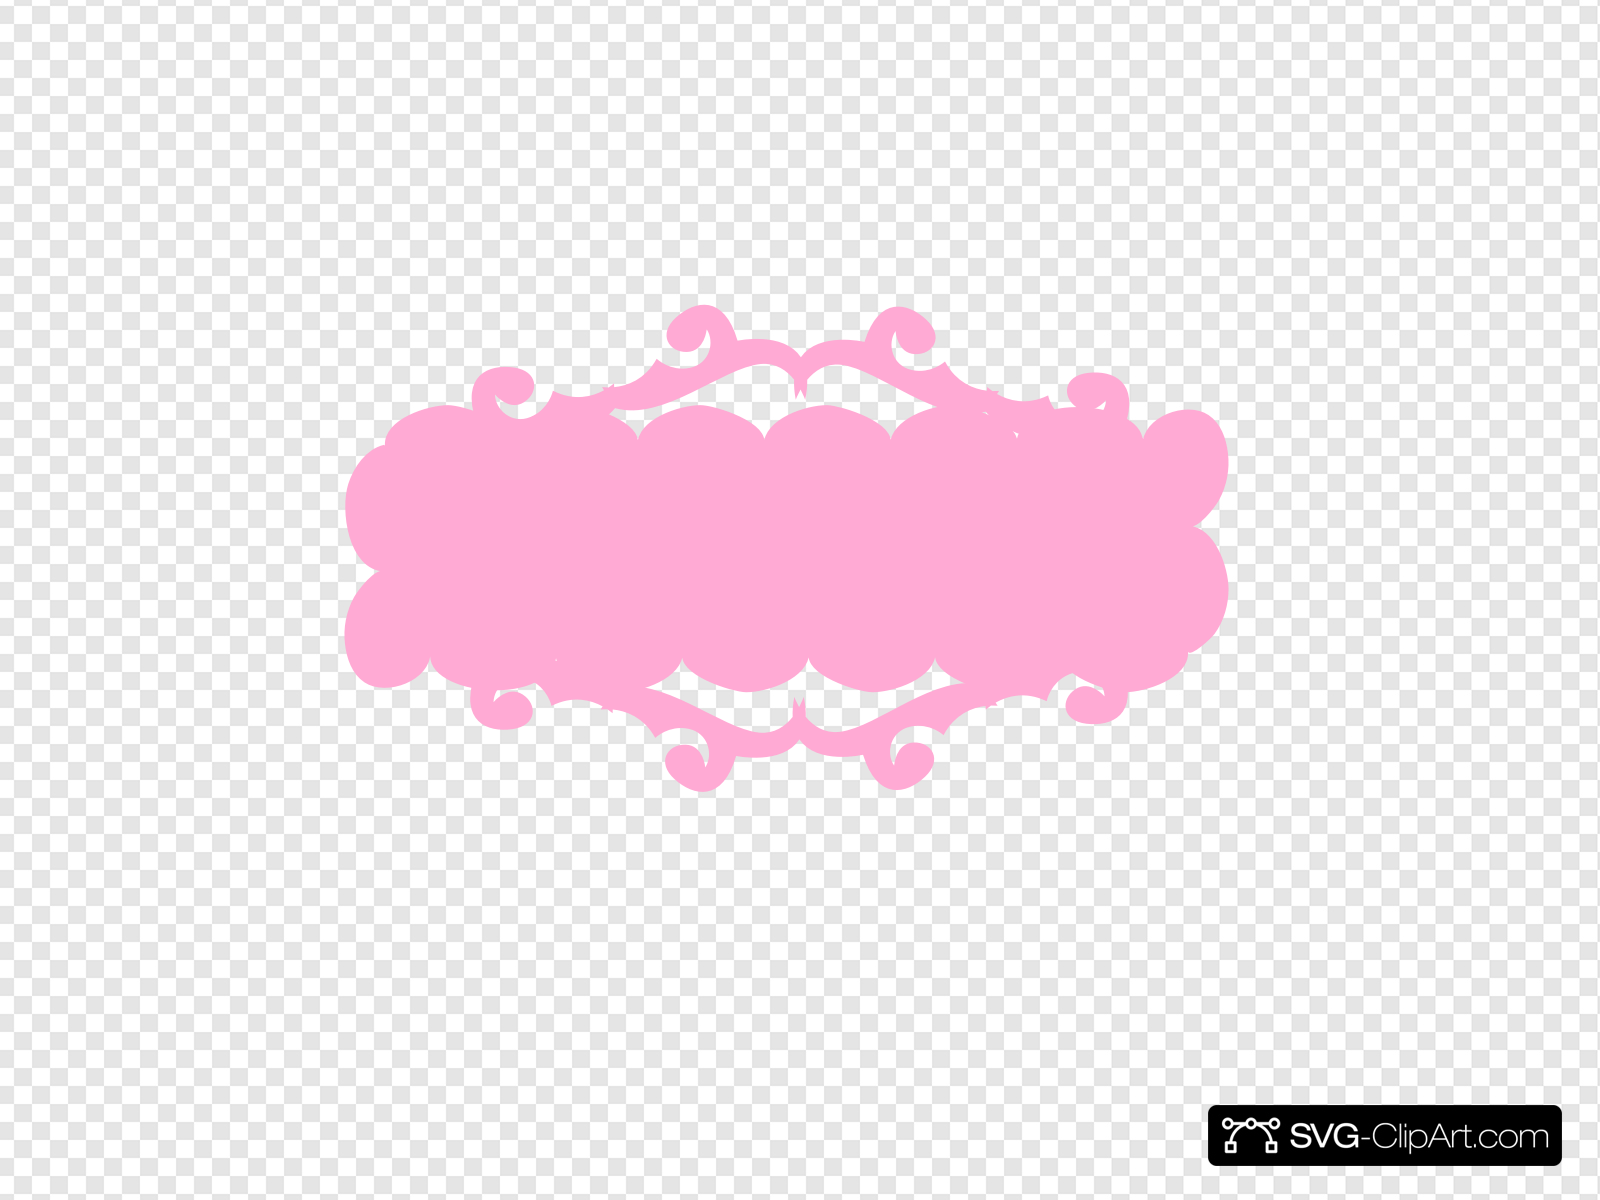 Pink Banner Clip art, Icon and SVG